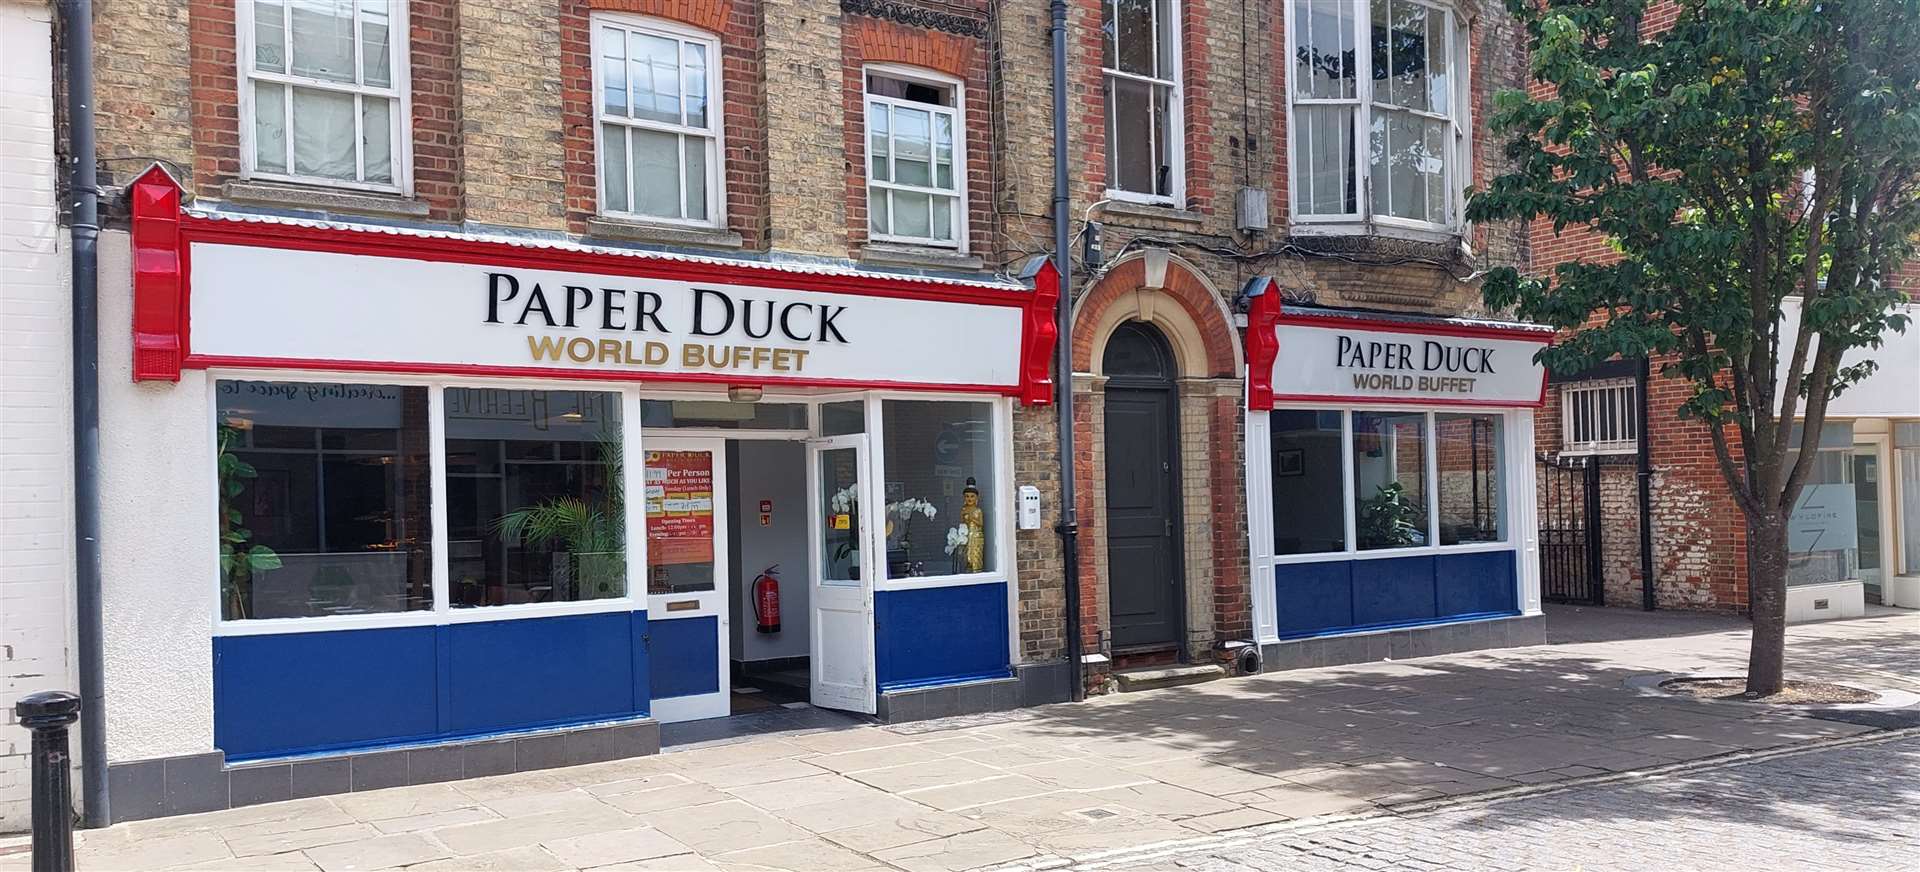 The Paper Duck in North Street